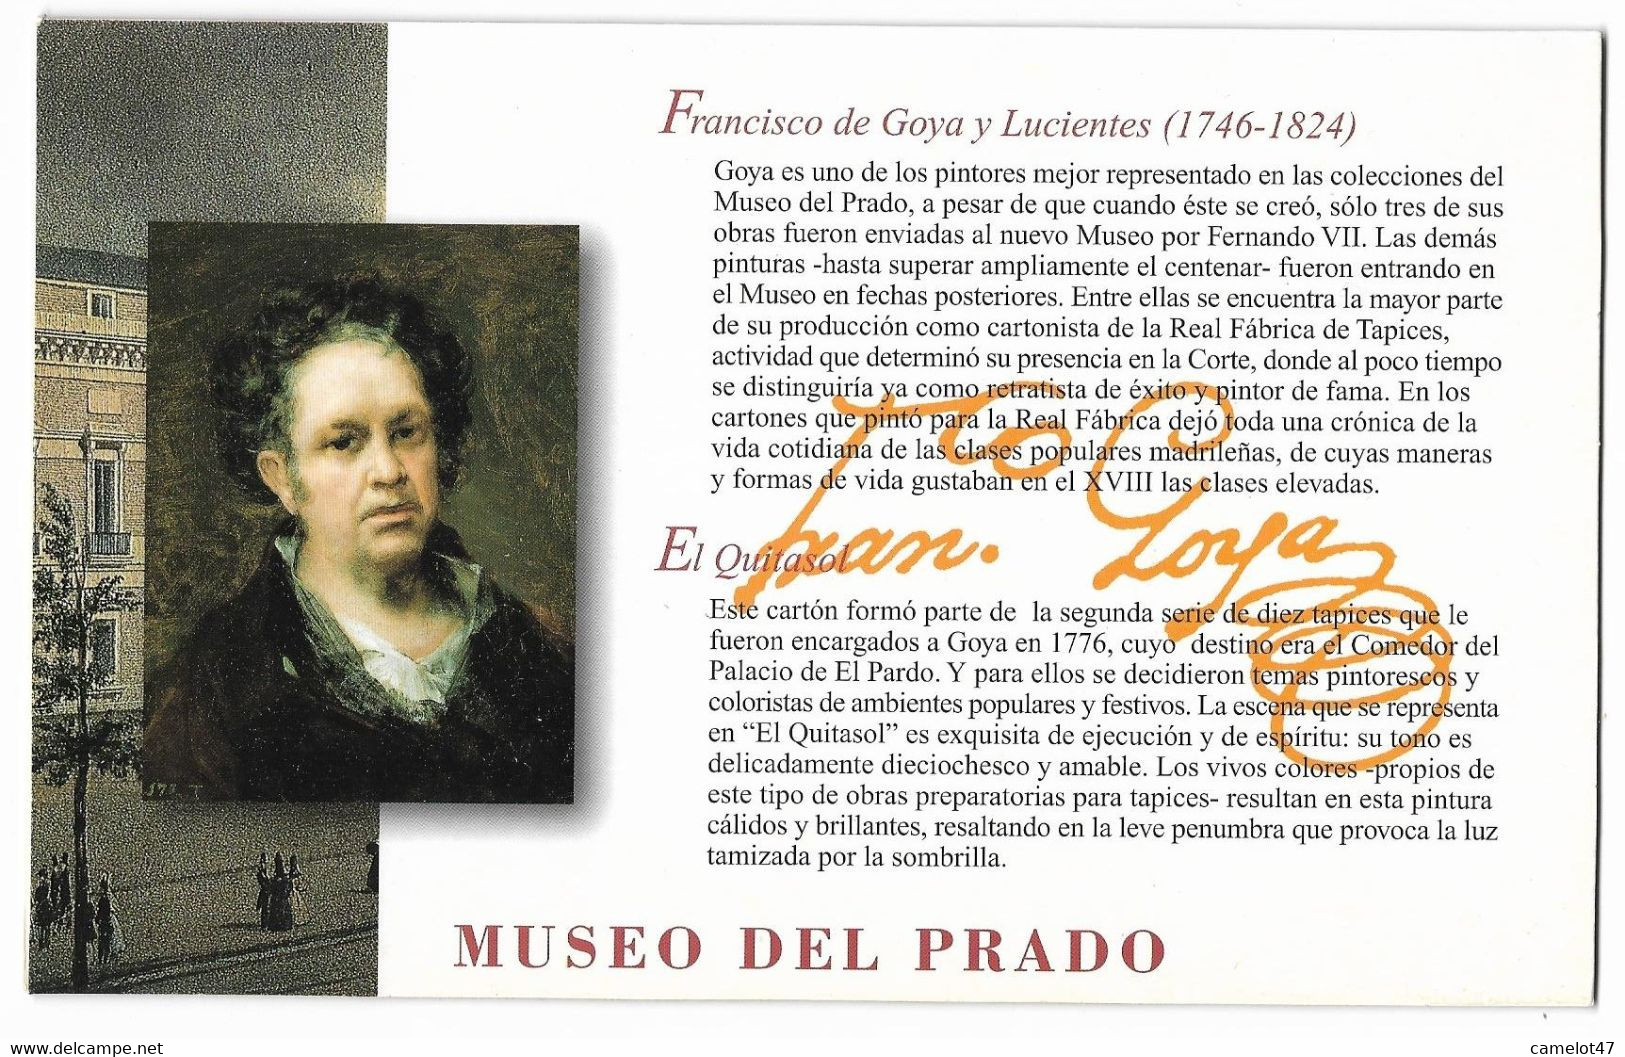 Spain Goya "El Quitasol" Painting, 100 Pta, Private, Limited Edtion In Folder # P-128 Folder - Painting